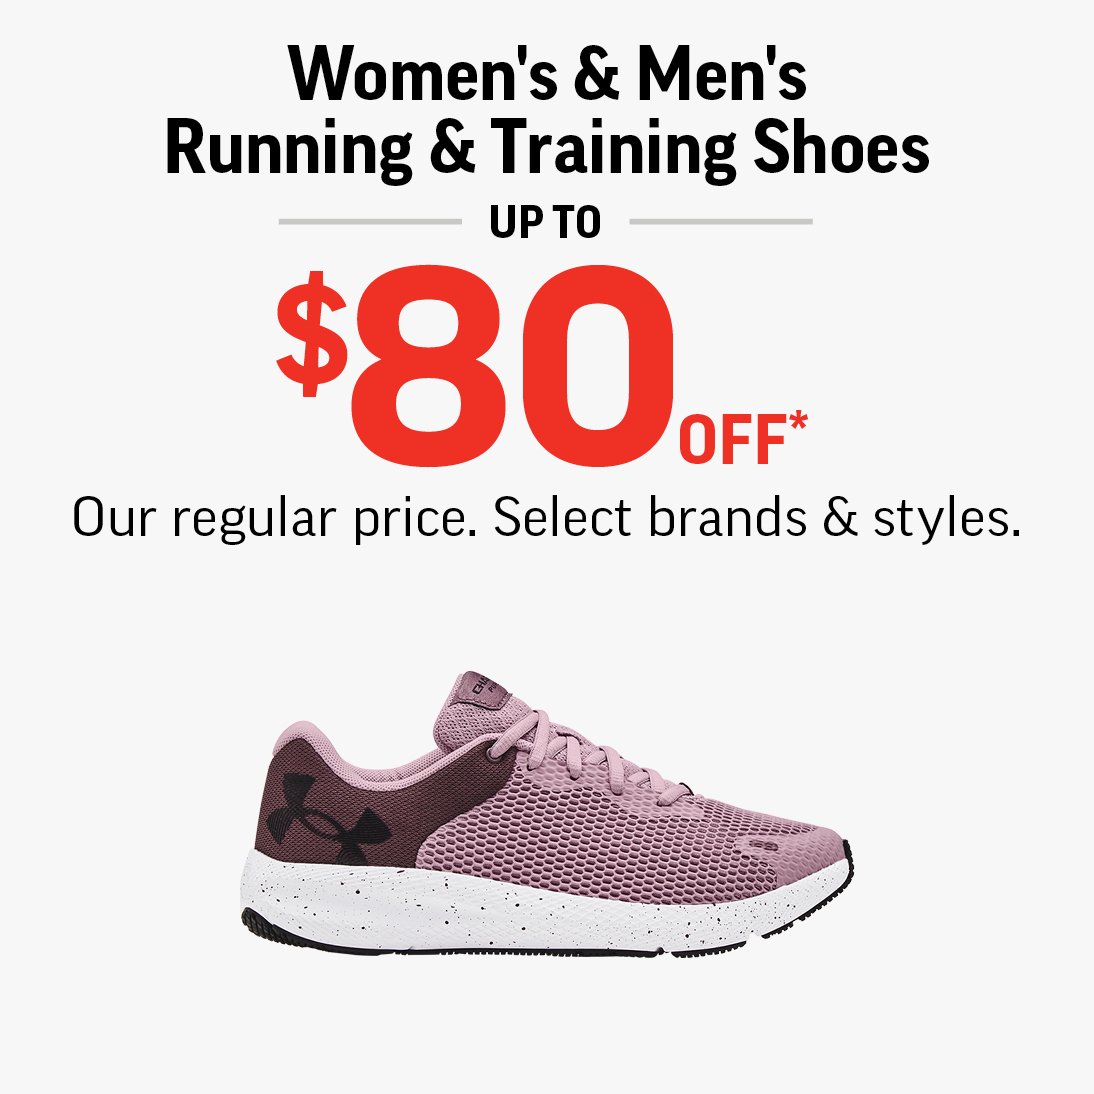 WOMEN'S & MEN'S RUNNING & TRAINING SHOES UP TO $80 OFF